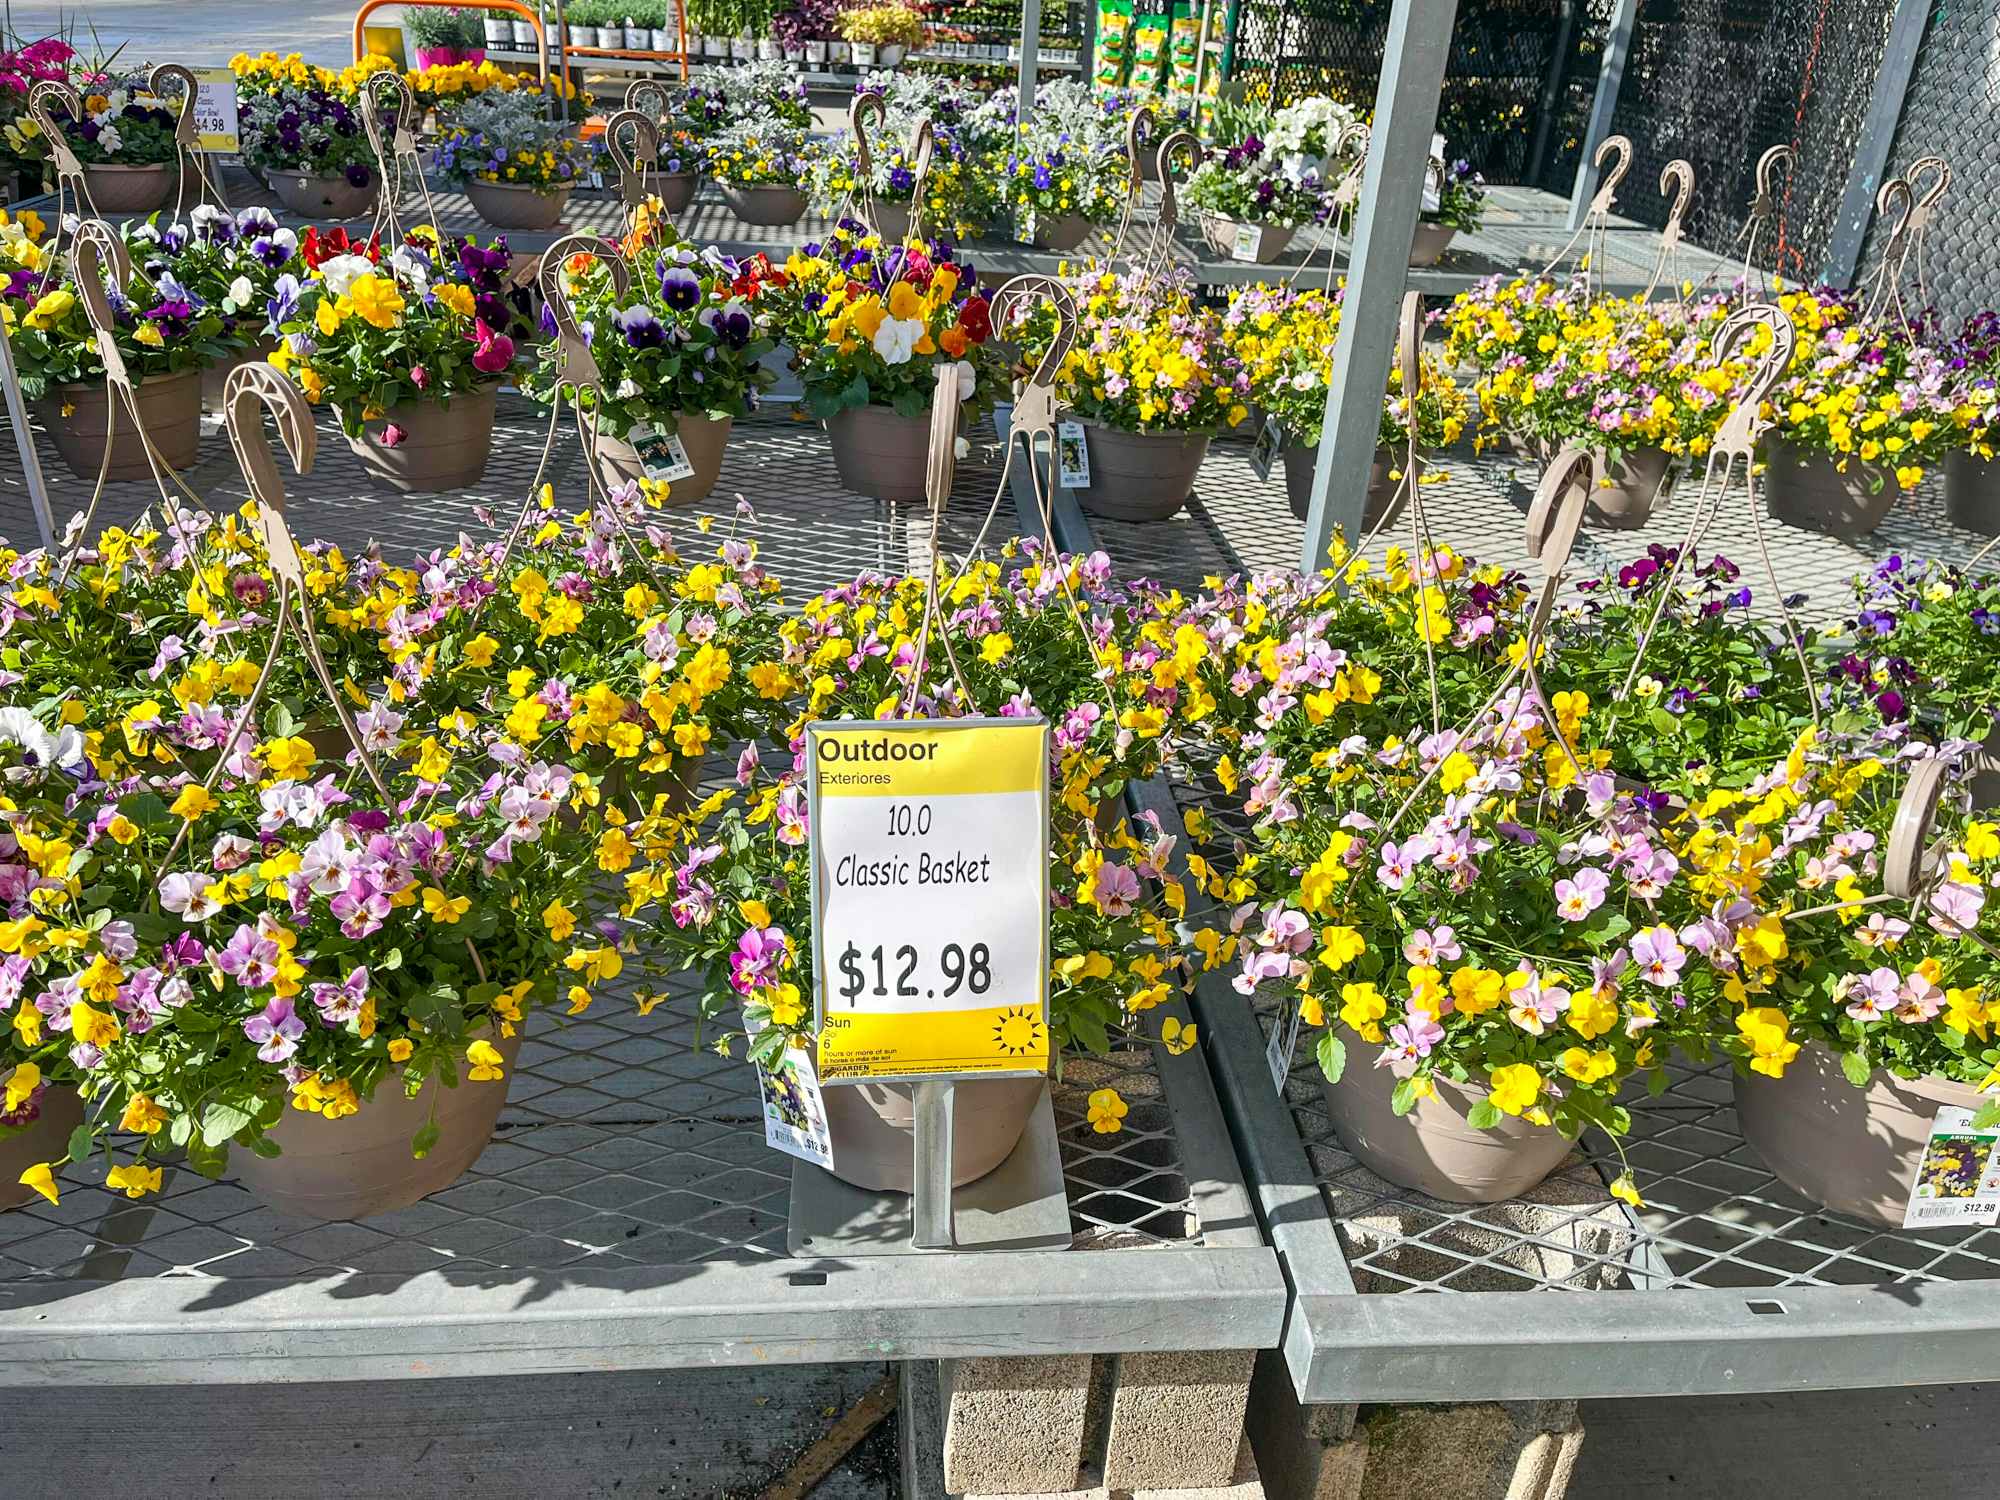 Hanging flower baskets on display in The Home Depot Nursery